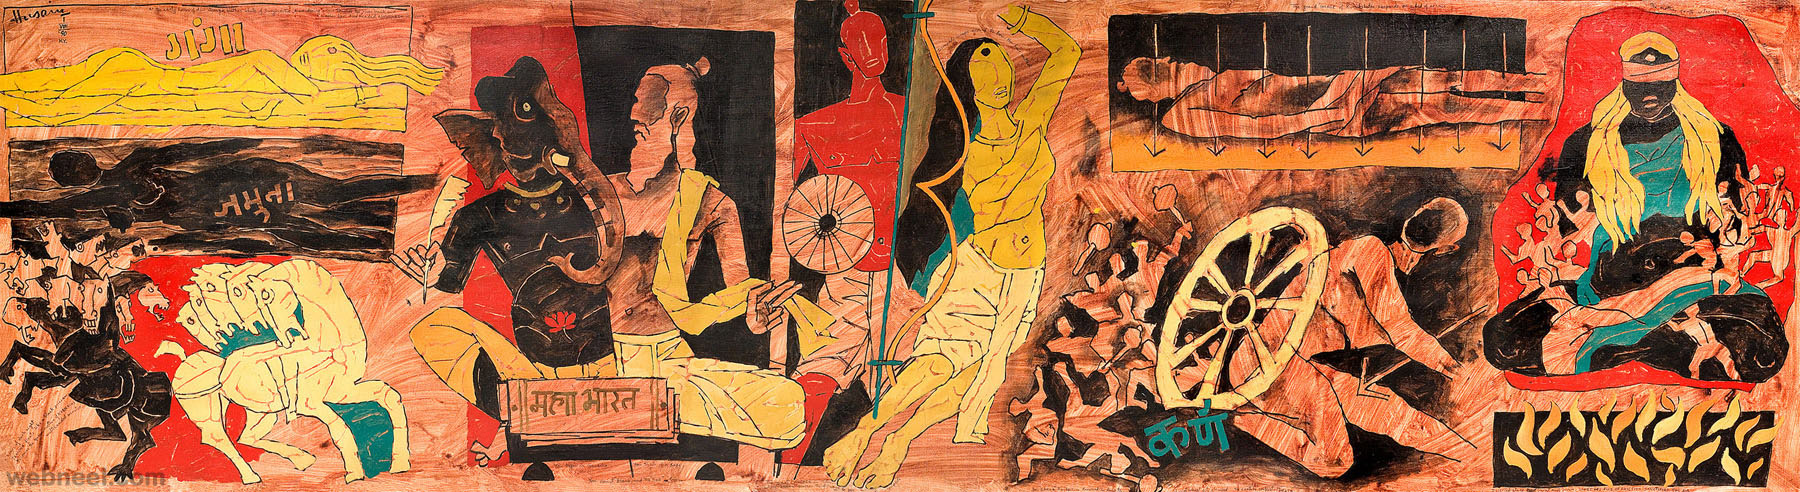 M.F. Husain: Master of Modern Indian Painting - About the 